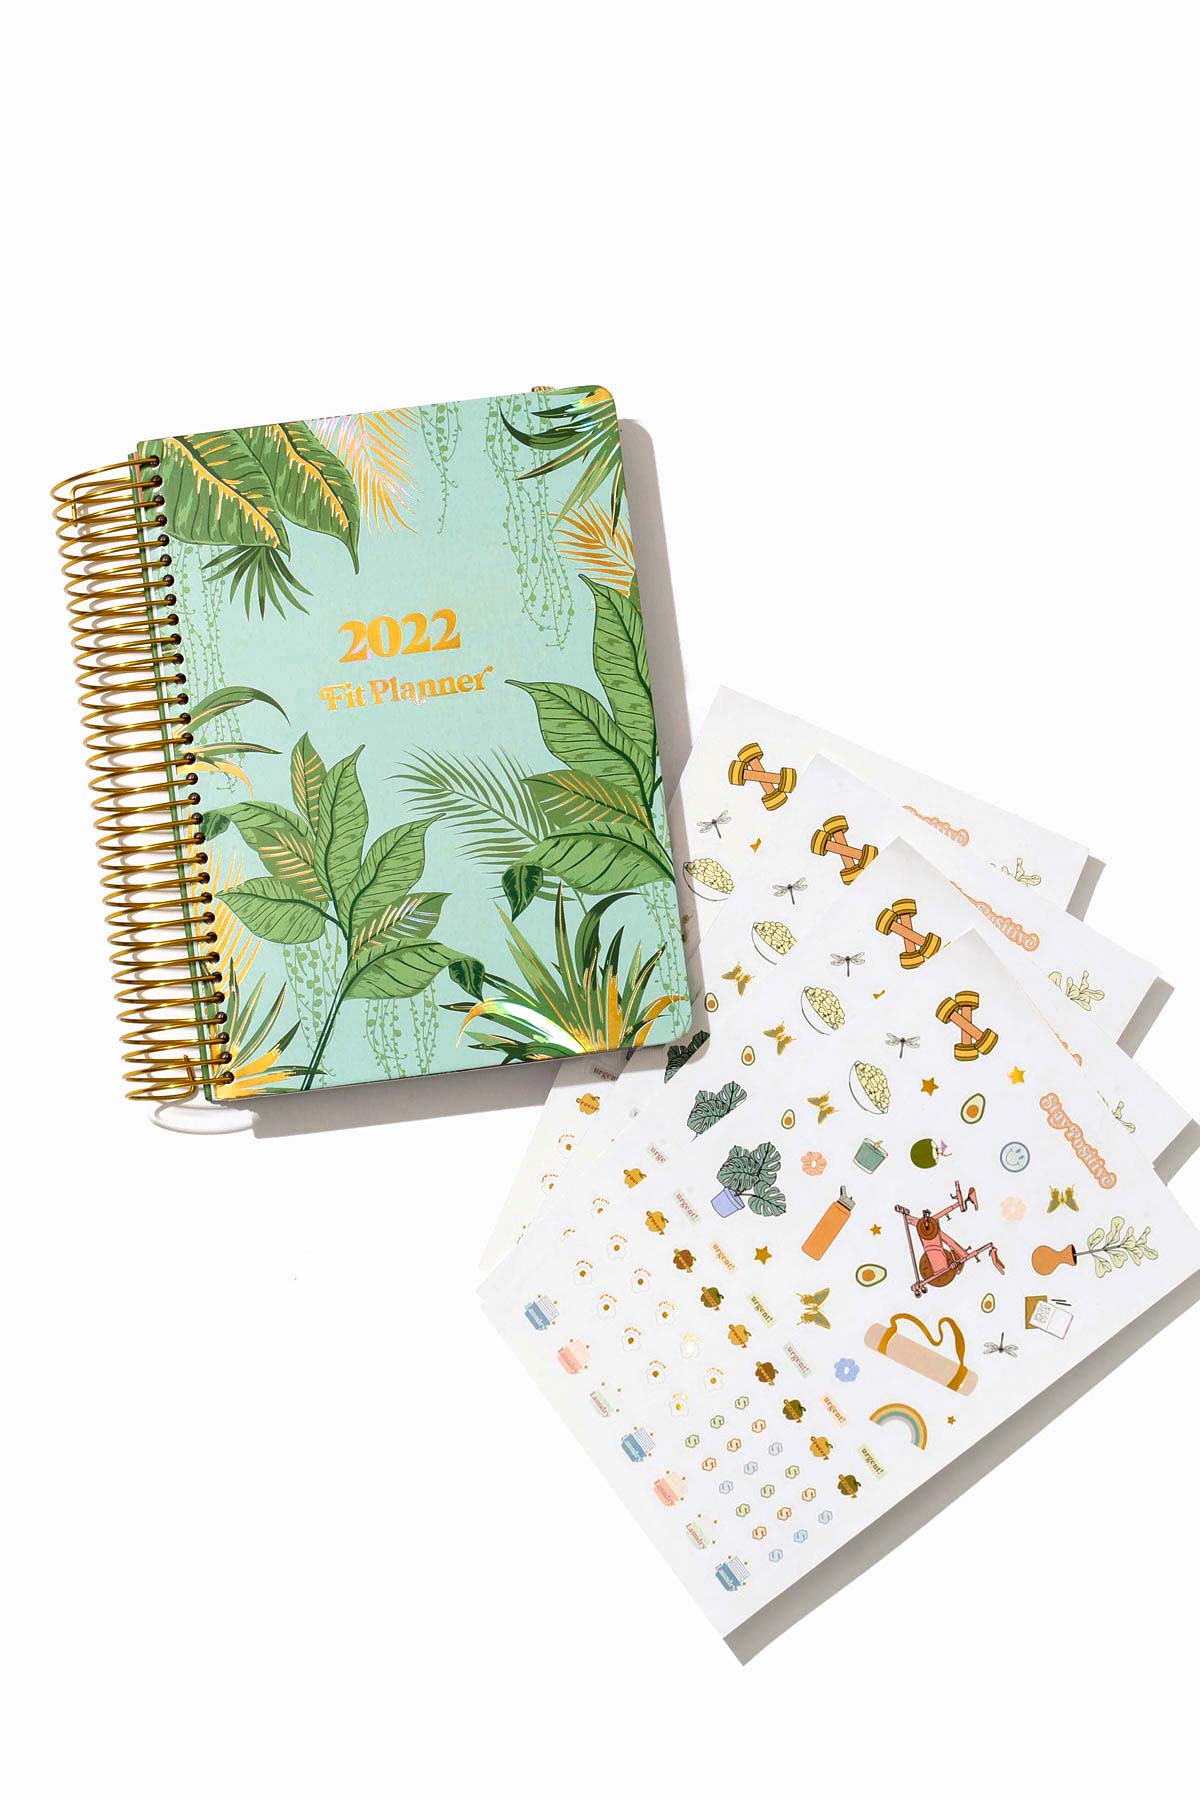 2022 popflex fit planner green cover plant life and stickers